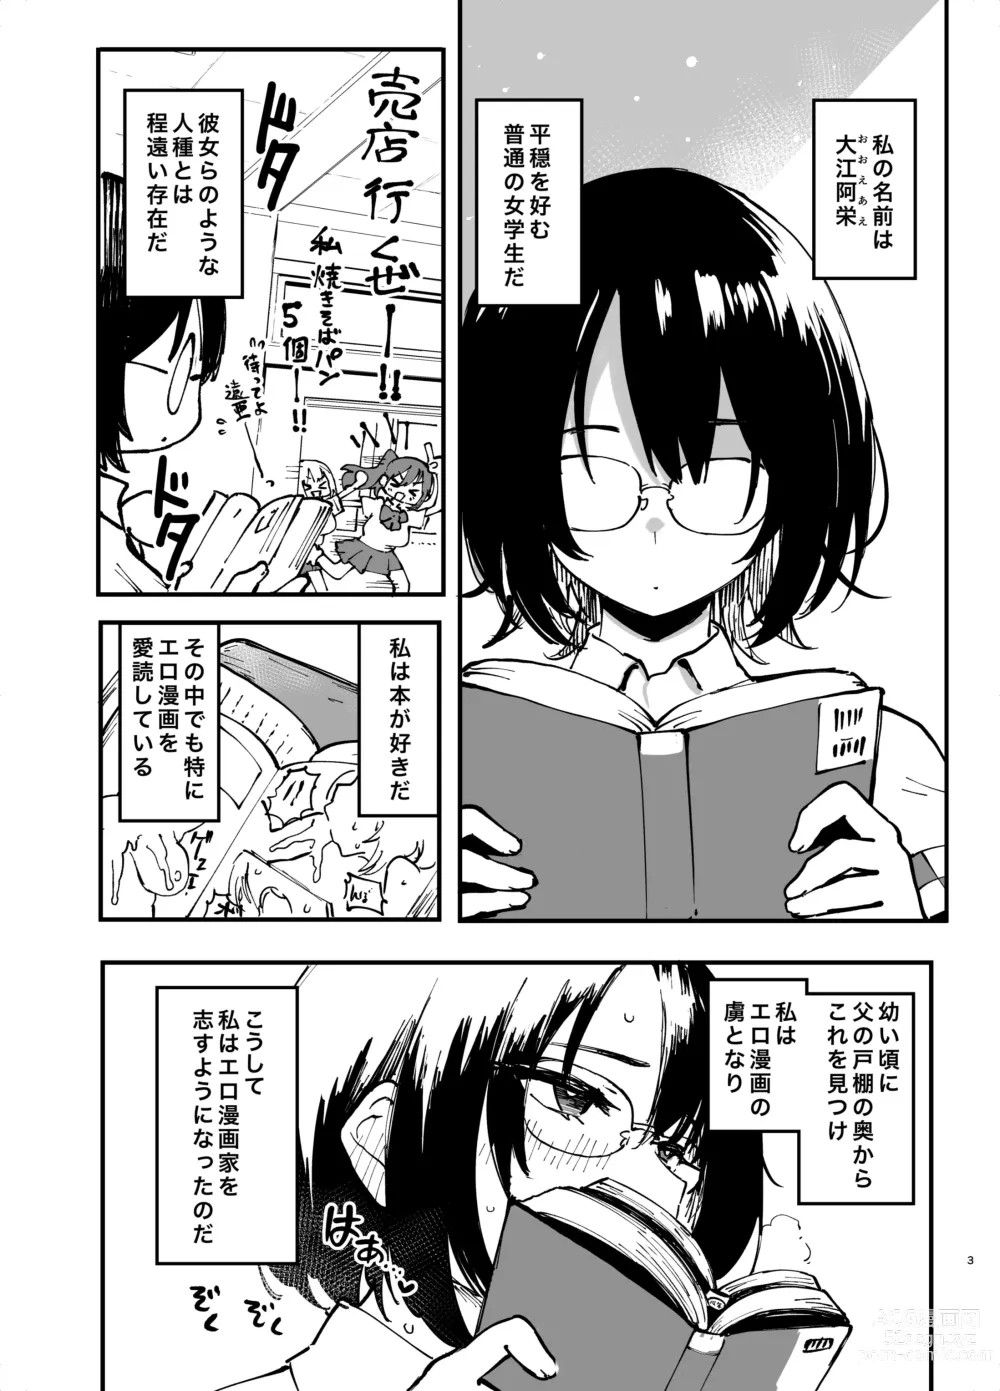 Page 3 of doujinshi OeAe